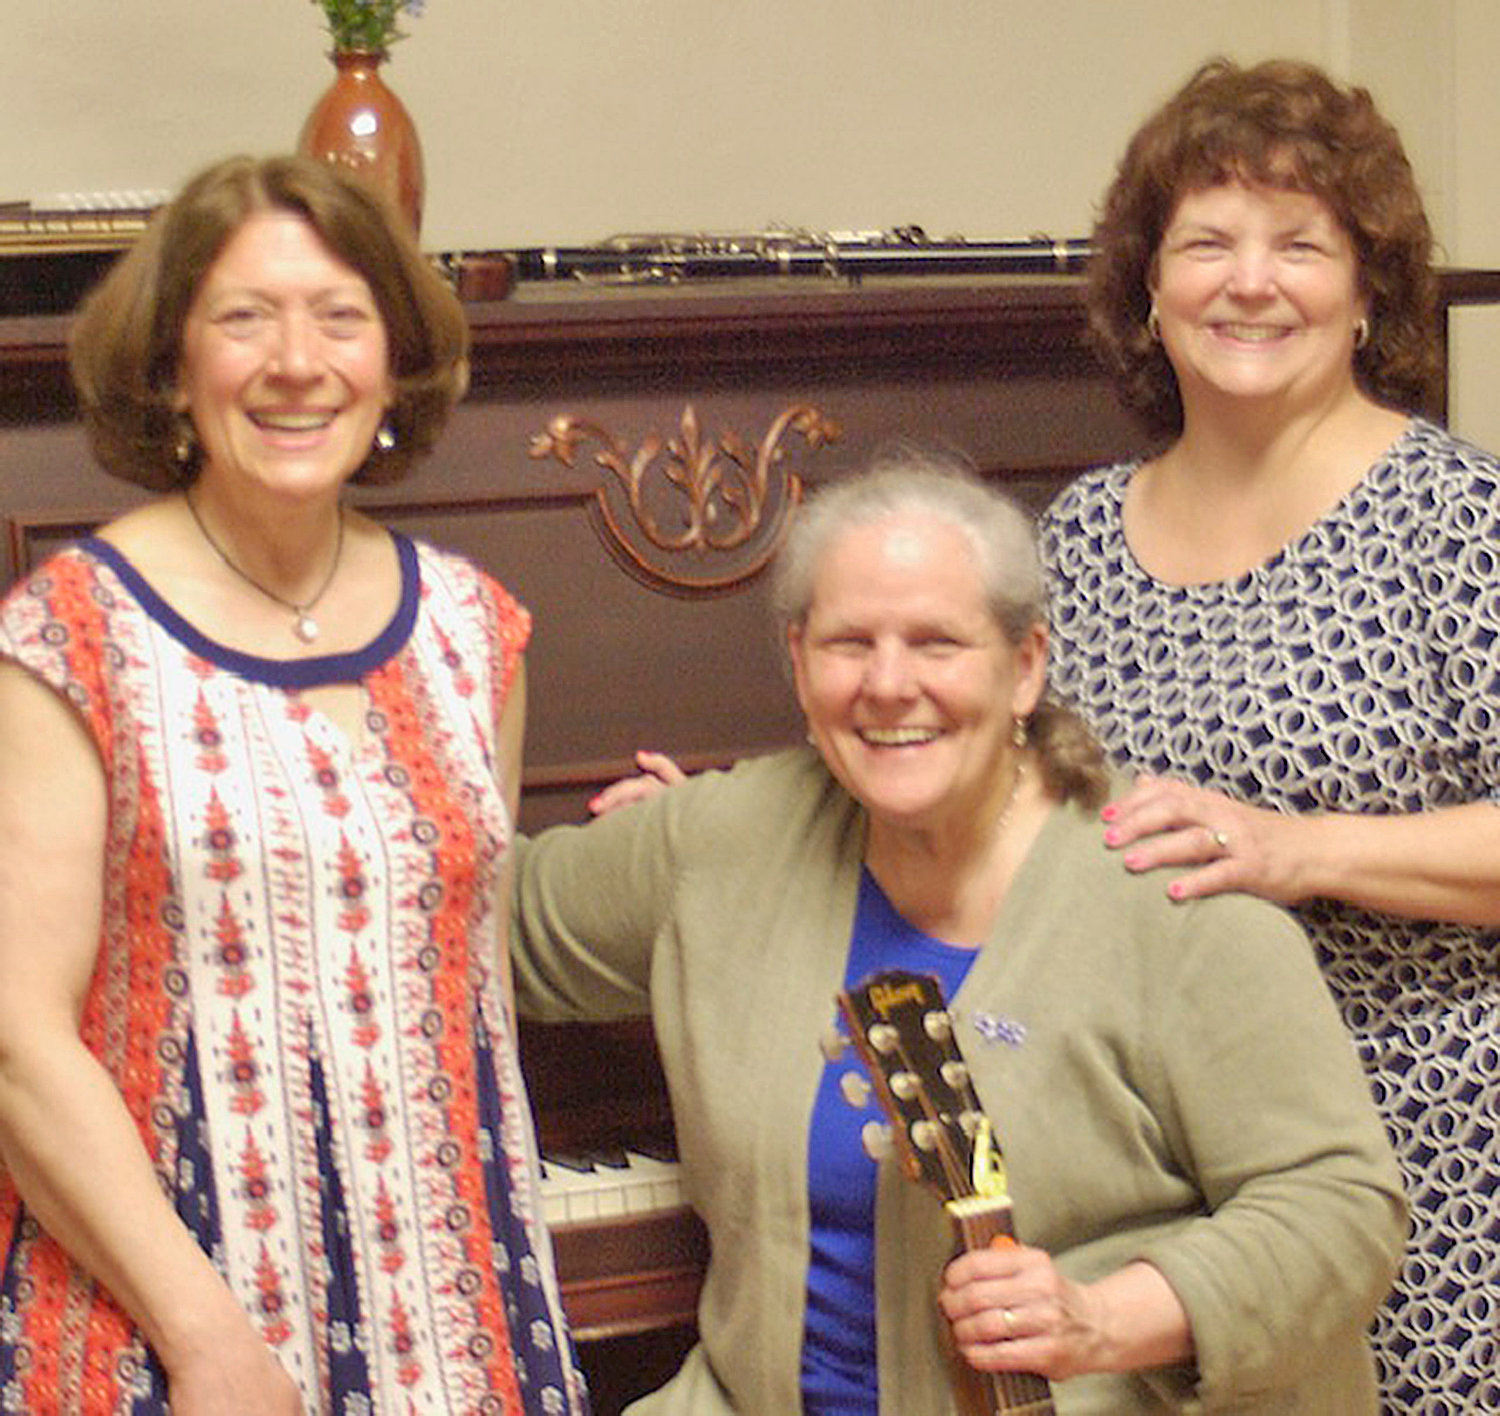 Wildflower, featuring, from left, Gail Brett, Vicky Allen and Breena Branham, play at 7:30 p.m. Oct. 1 at Park Coffee House in Holland Patent.